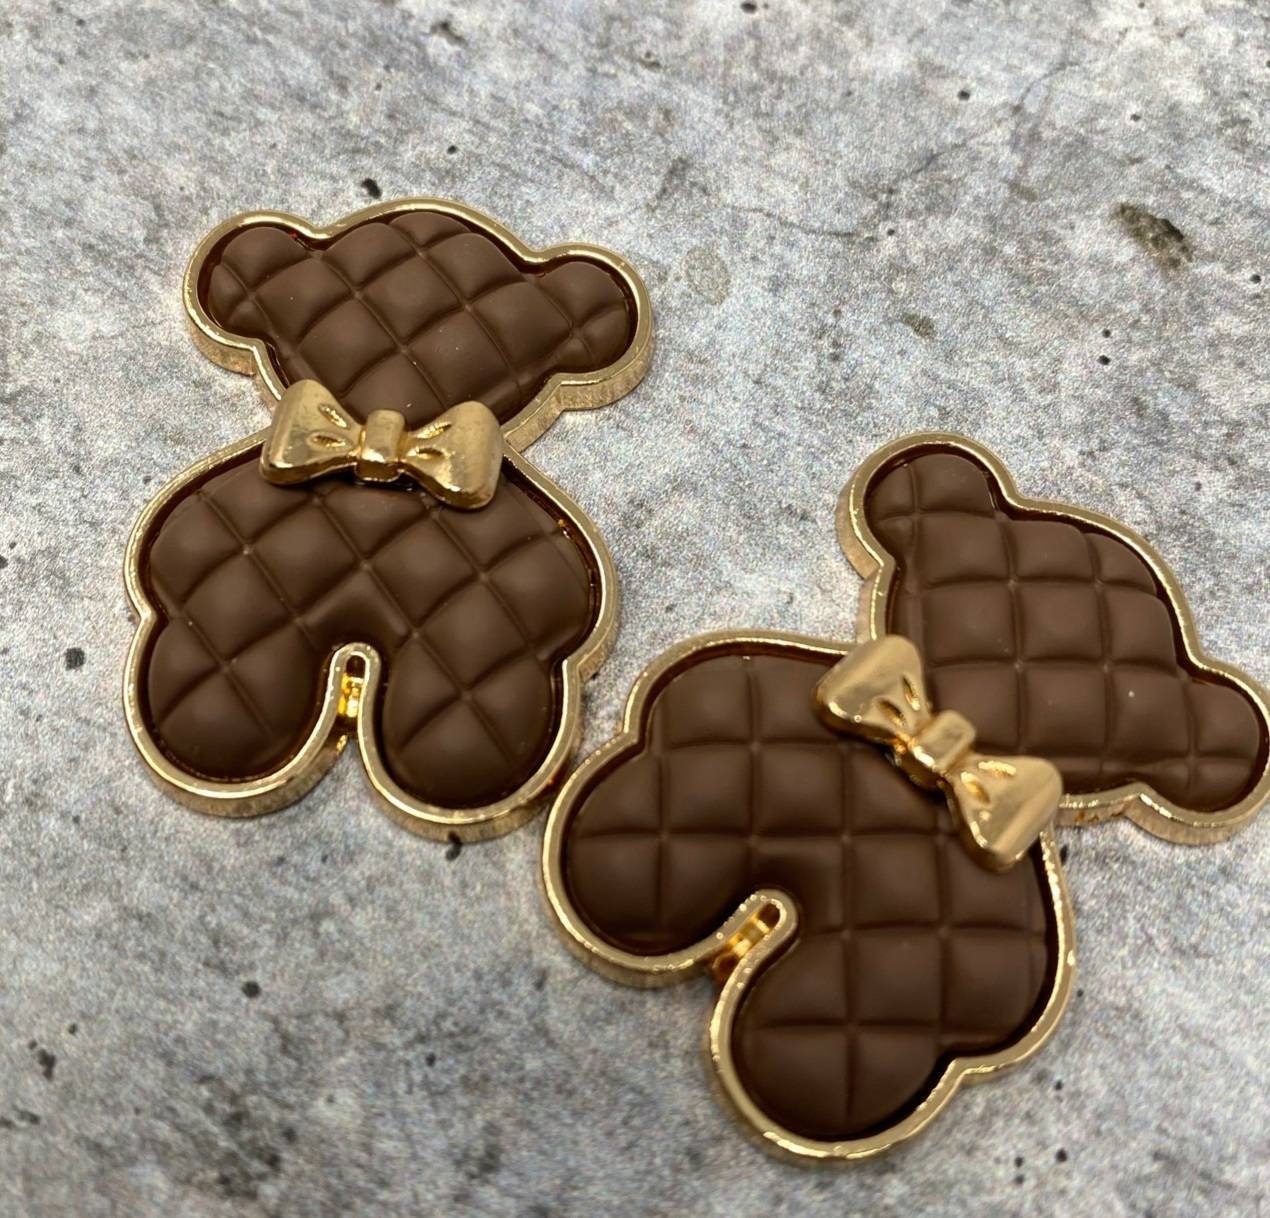 Exclusive, Chocolate "Bear" Tufted w/Gold Bow Charm, 1-pc Flatback Charm for CR O CS, Phone Cases, Sunglasses, Decor, and More! Size 2"